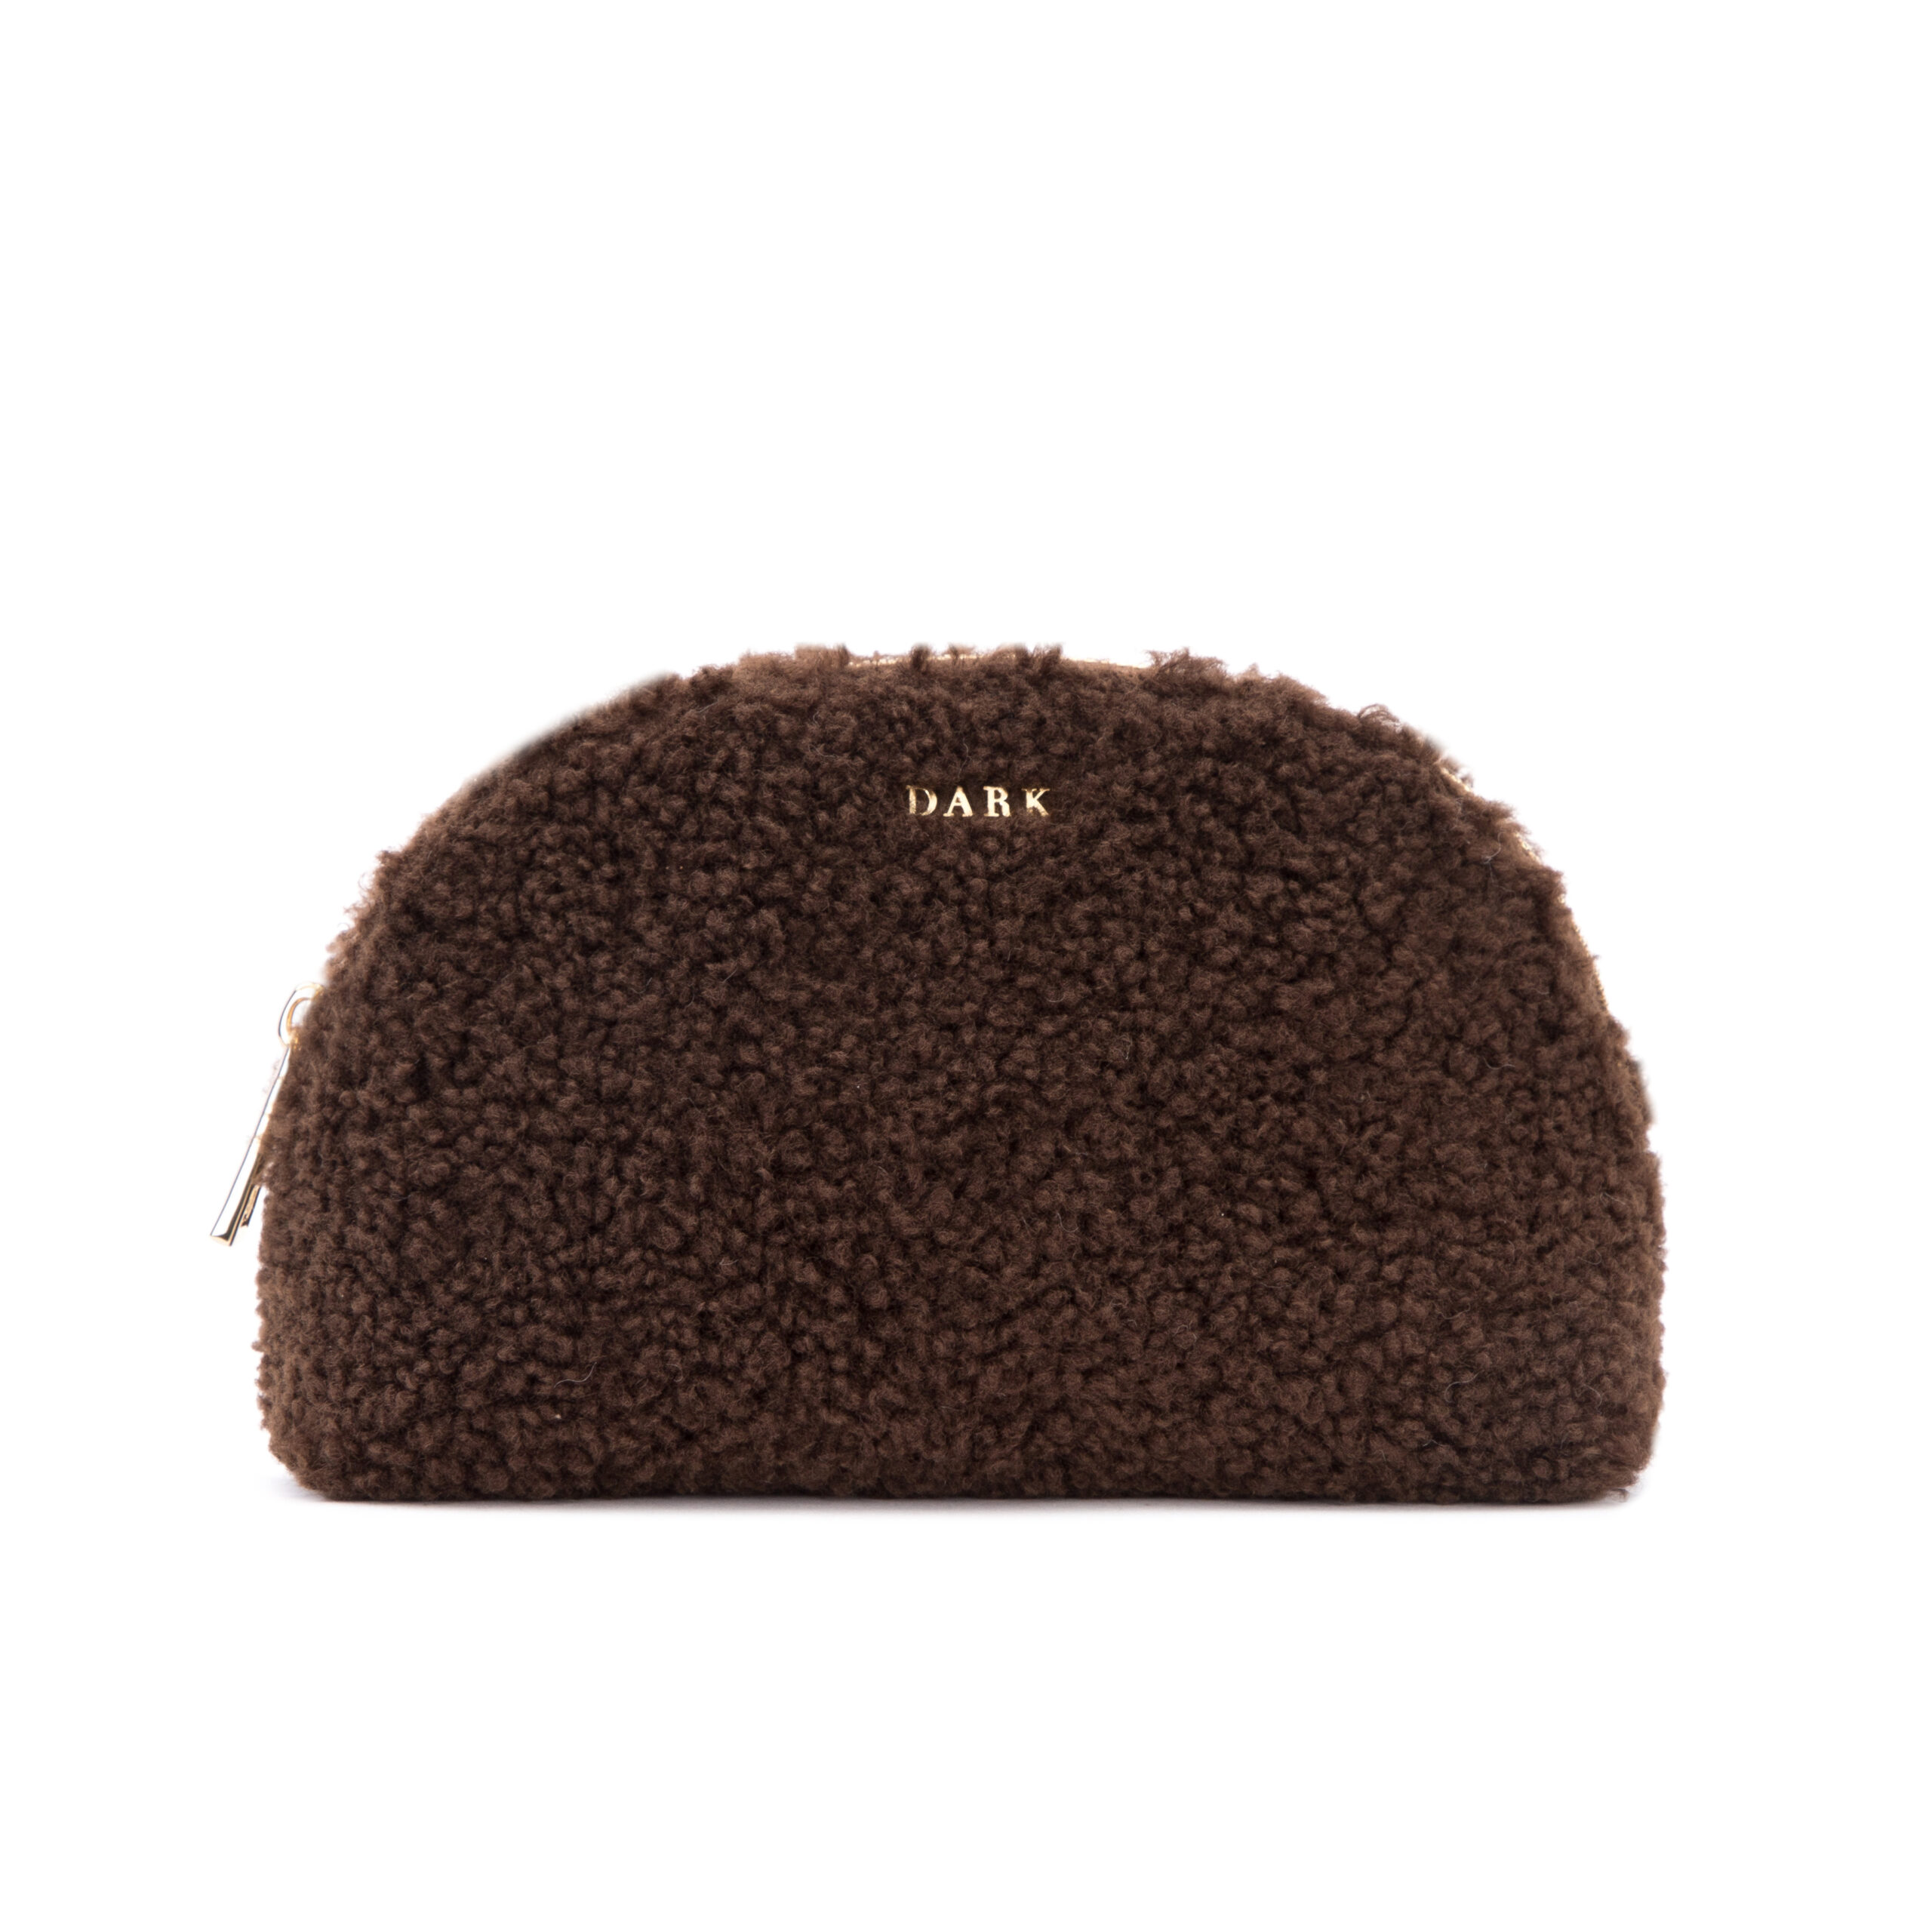 TEDDY MAKEUP POUCH – CHOCOLATE BROWN